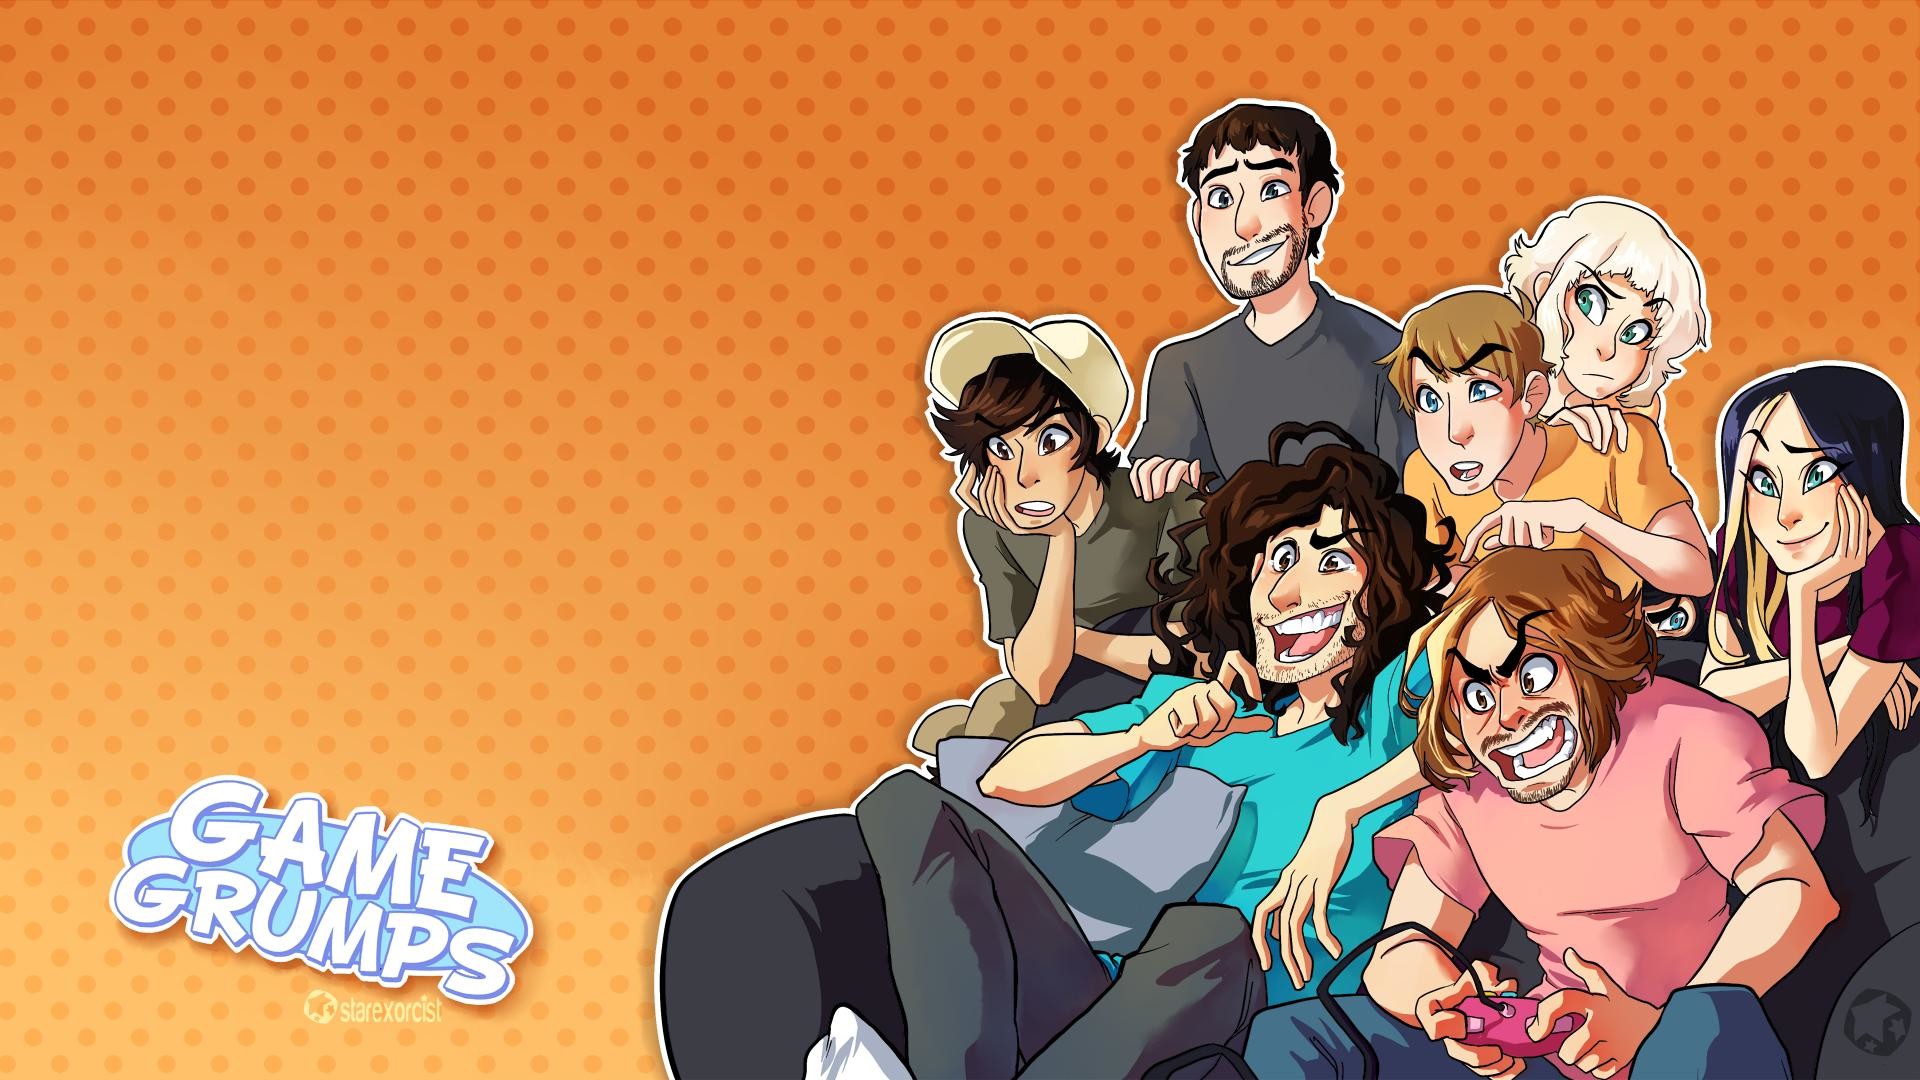 1920x1080 GameGrumps Wallpaper because I apparently have too much time on my hands ...